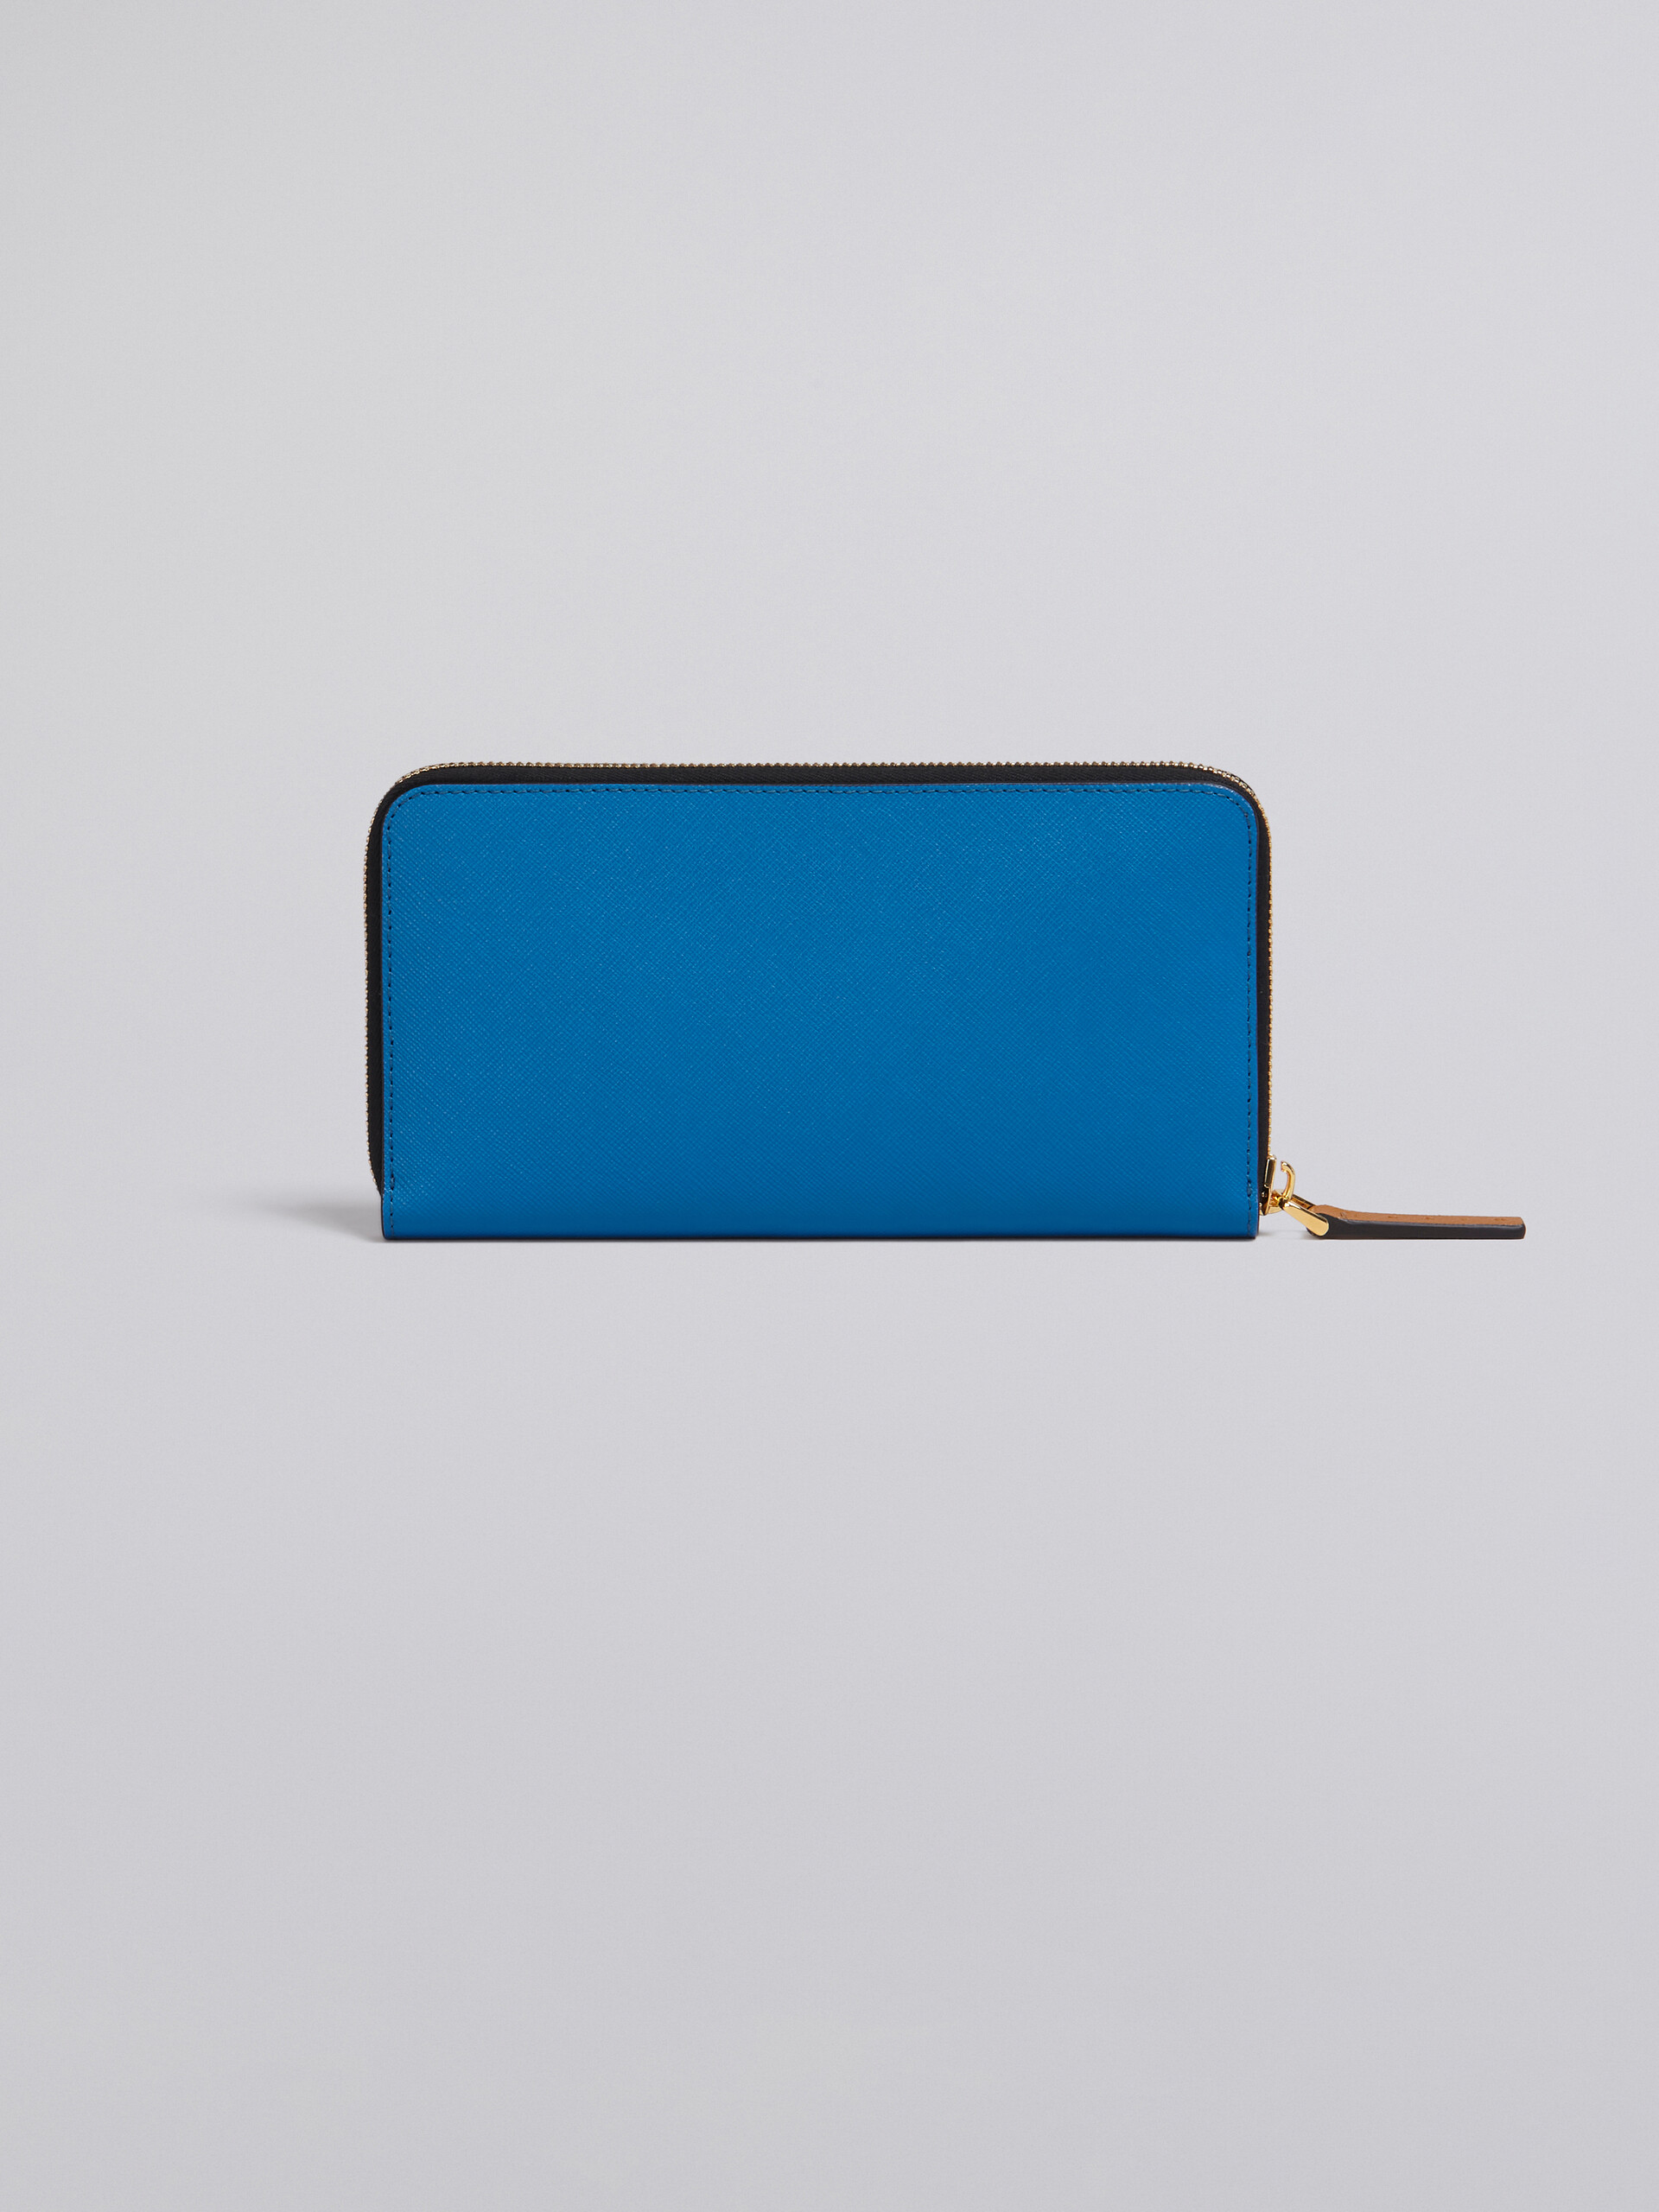 Brown white and blue saffiano leather zip-around wallet - Wallets - Image 3